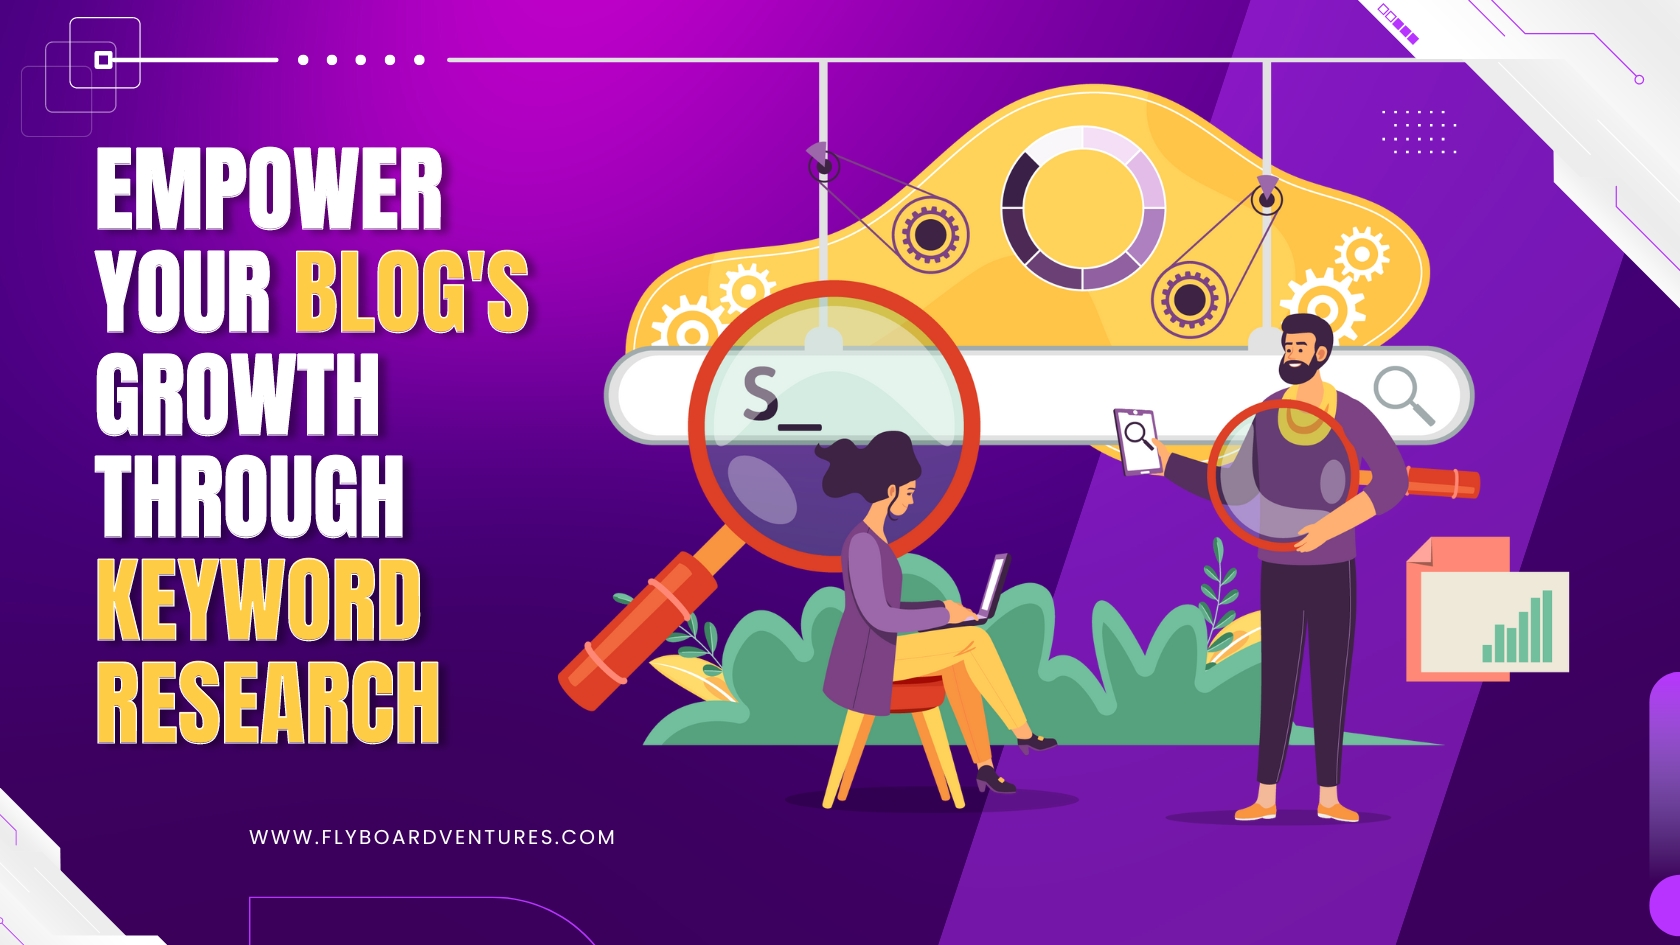 Empower Your Blog's Growth Through Keyword Research